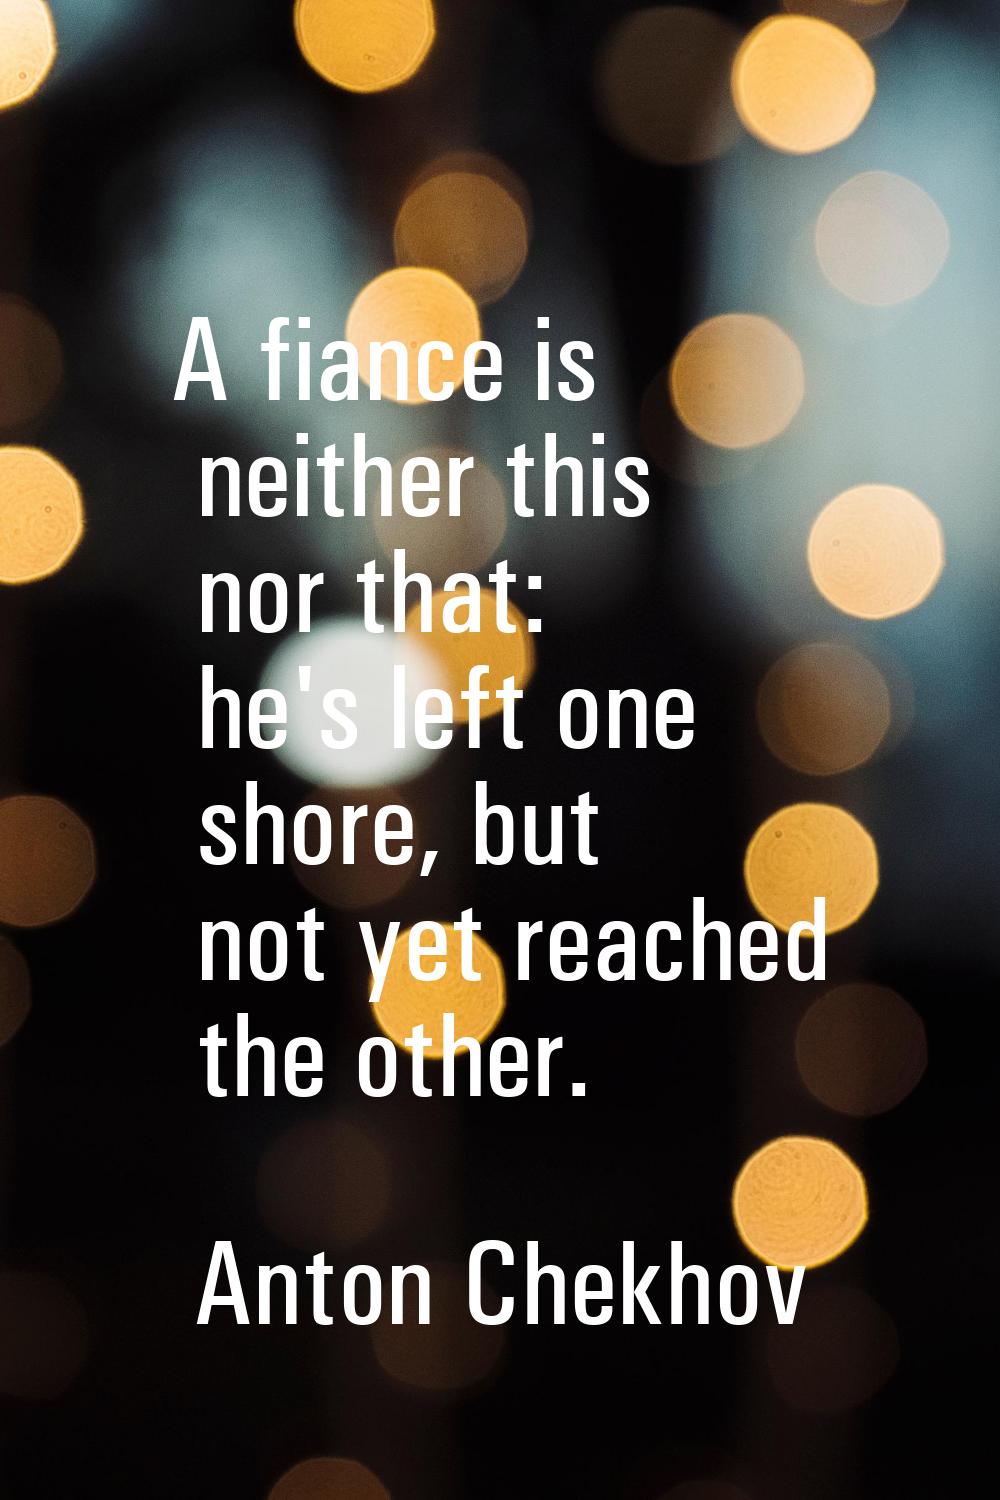 A fiance is neither this nor that: he's left one shore, but not yet reached the other.